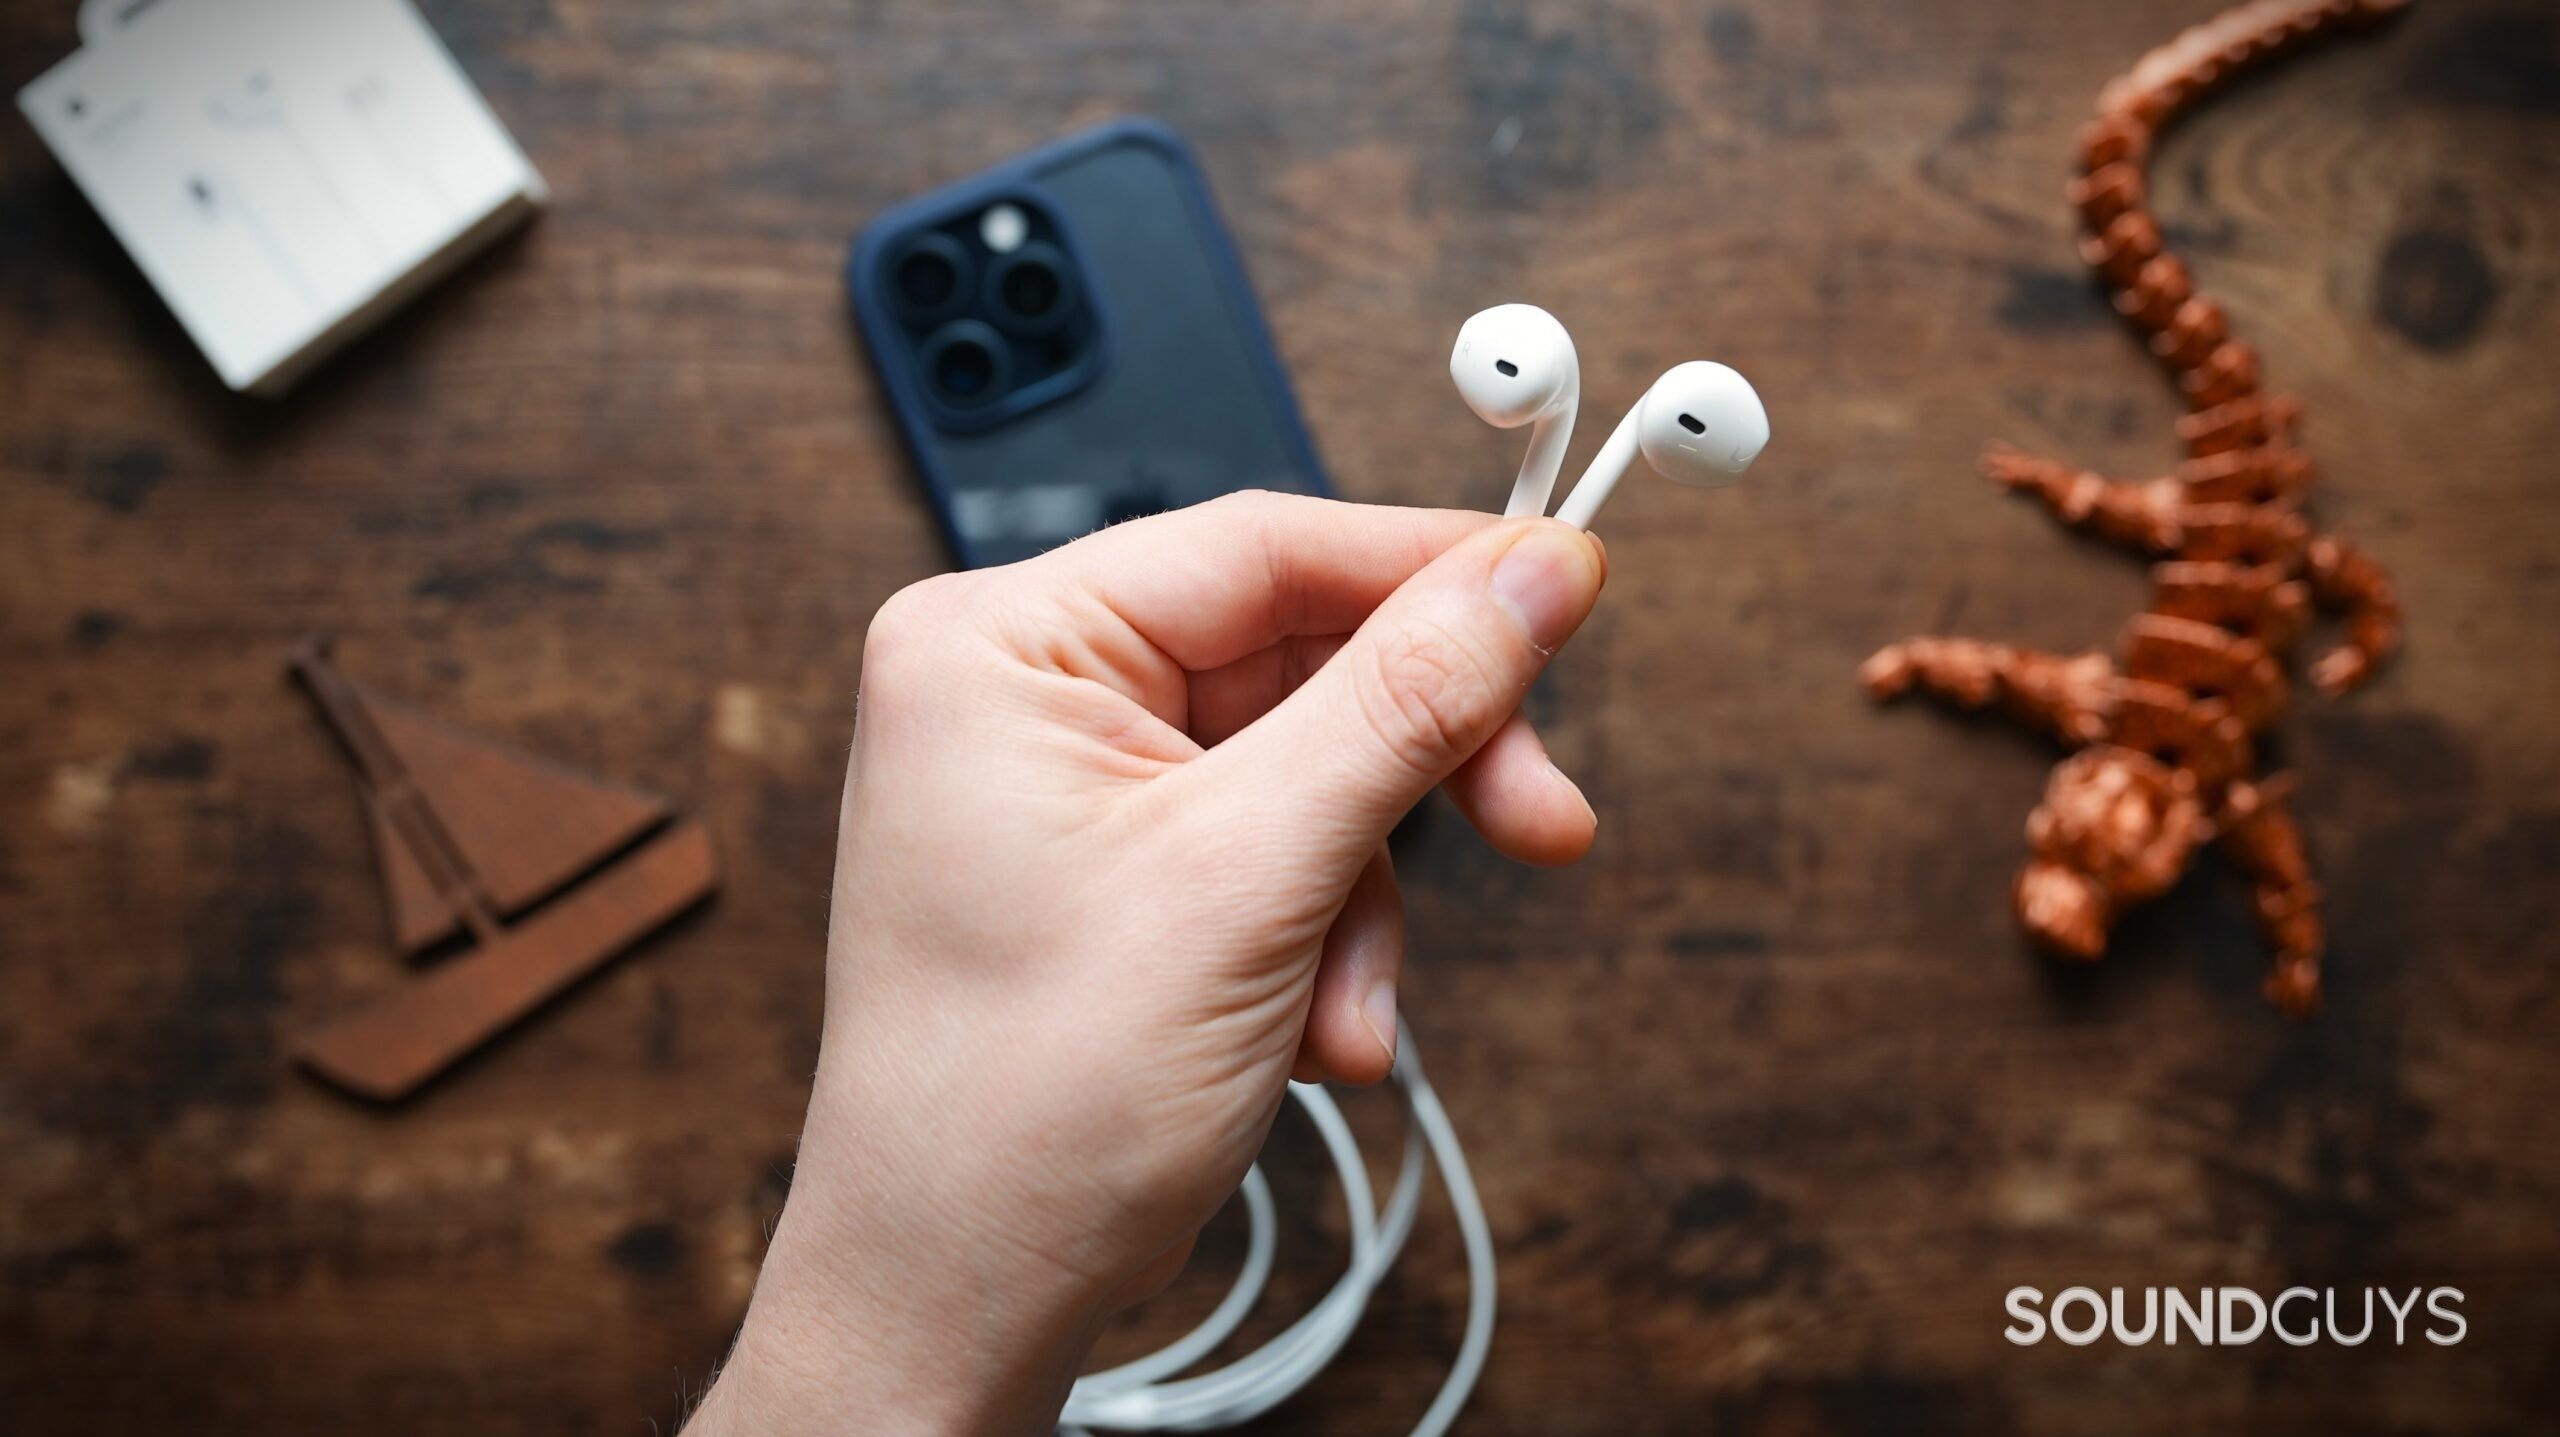 A hand holding the Apple EarPods in their fingertips.